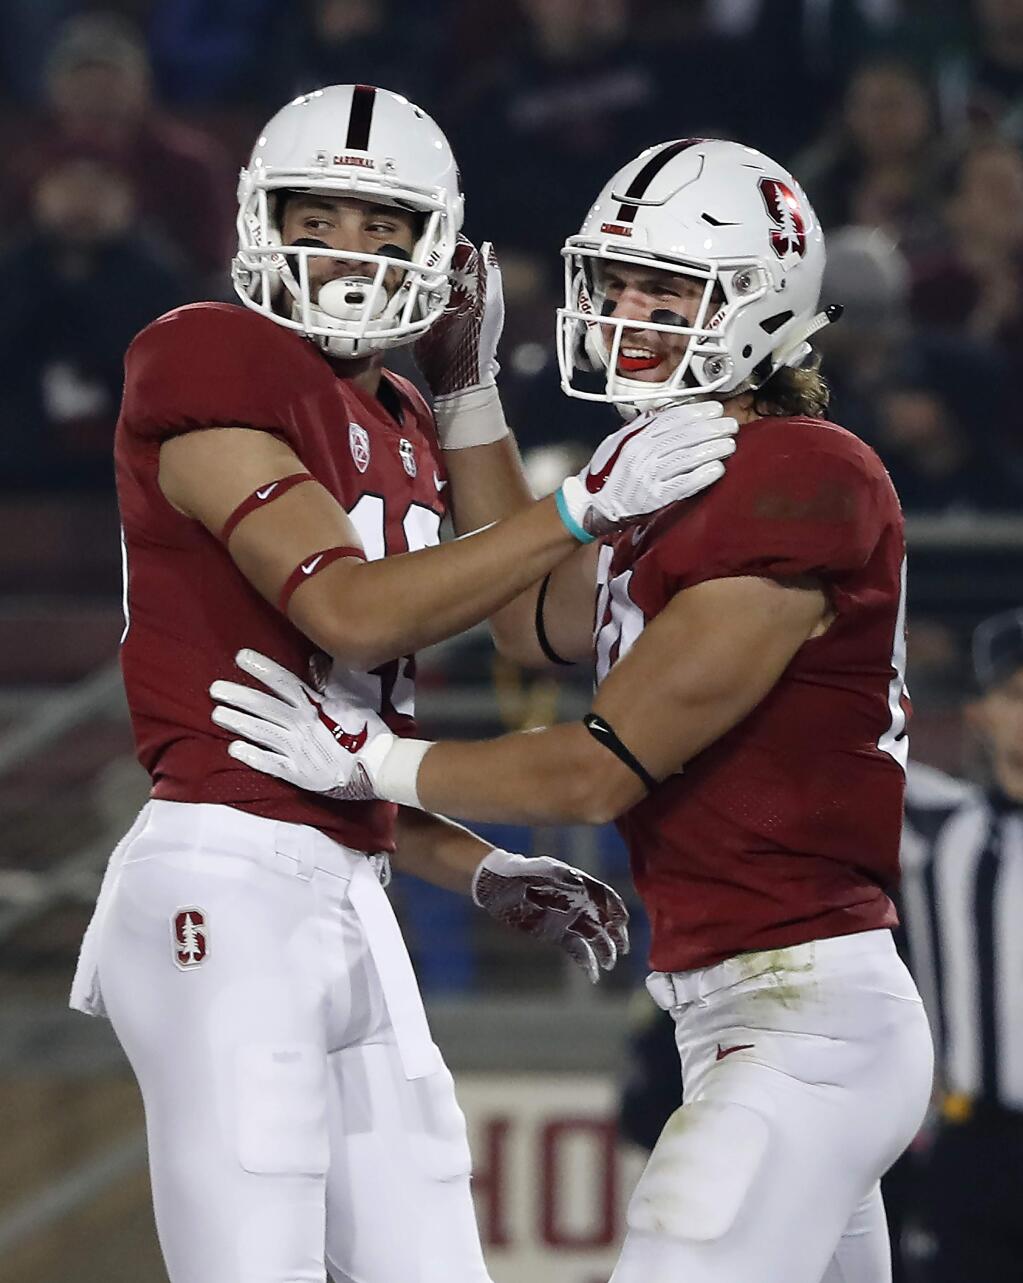 Stanford tight end Colby Parkinson, right, celebrates with Simi Fehoko after catching a touchdown pass against Oregon State in the first half during an NCAA college football game on Saturday, Nov. 10, 2018, in Stanford, Calif. (AP Photo/Tony Avelar)